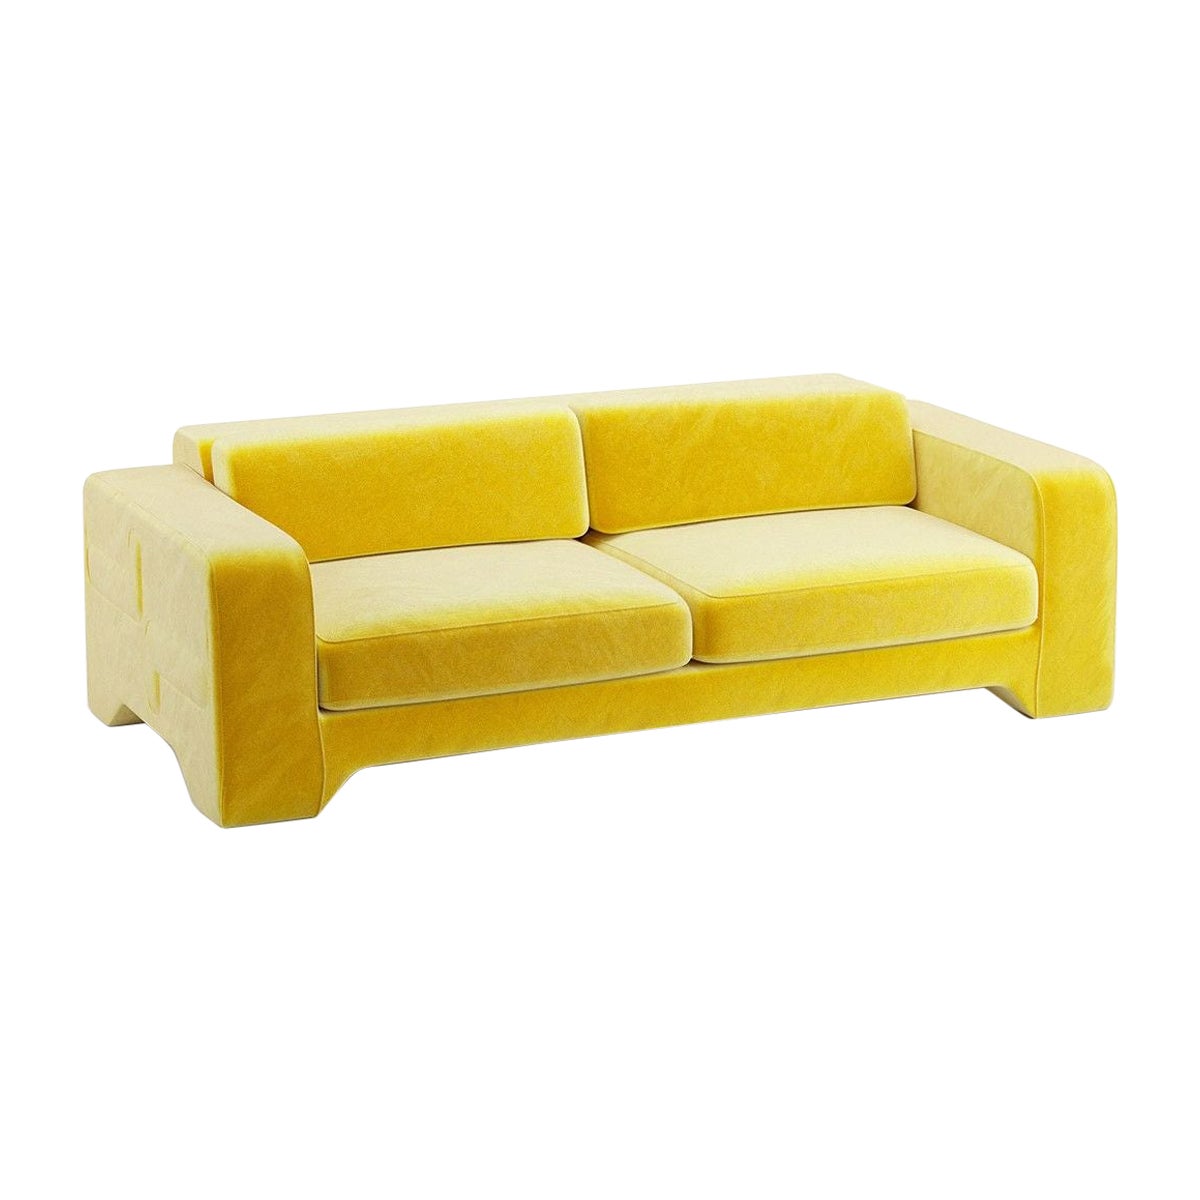 Popus Editions Giovanna 4 Seater Sofa in Yellow Verone Velvet Upholstery For Sale